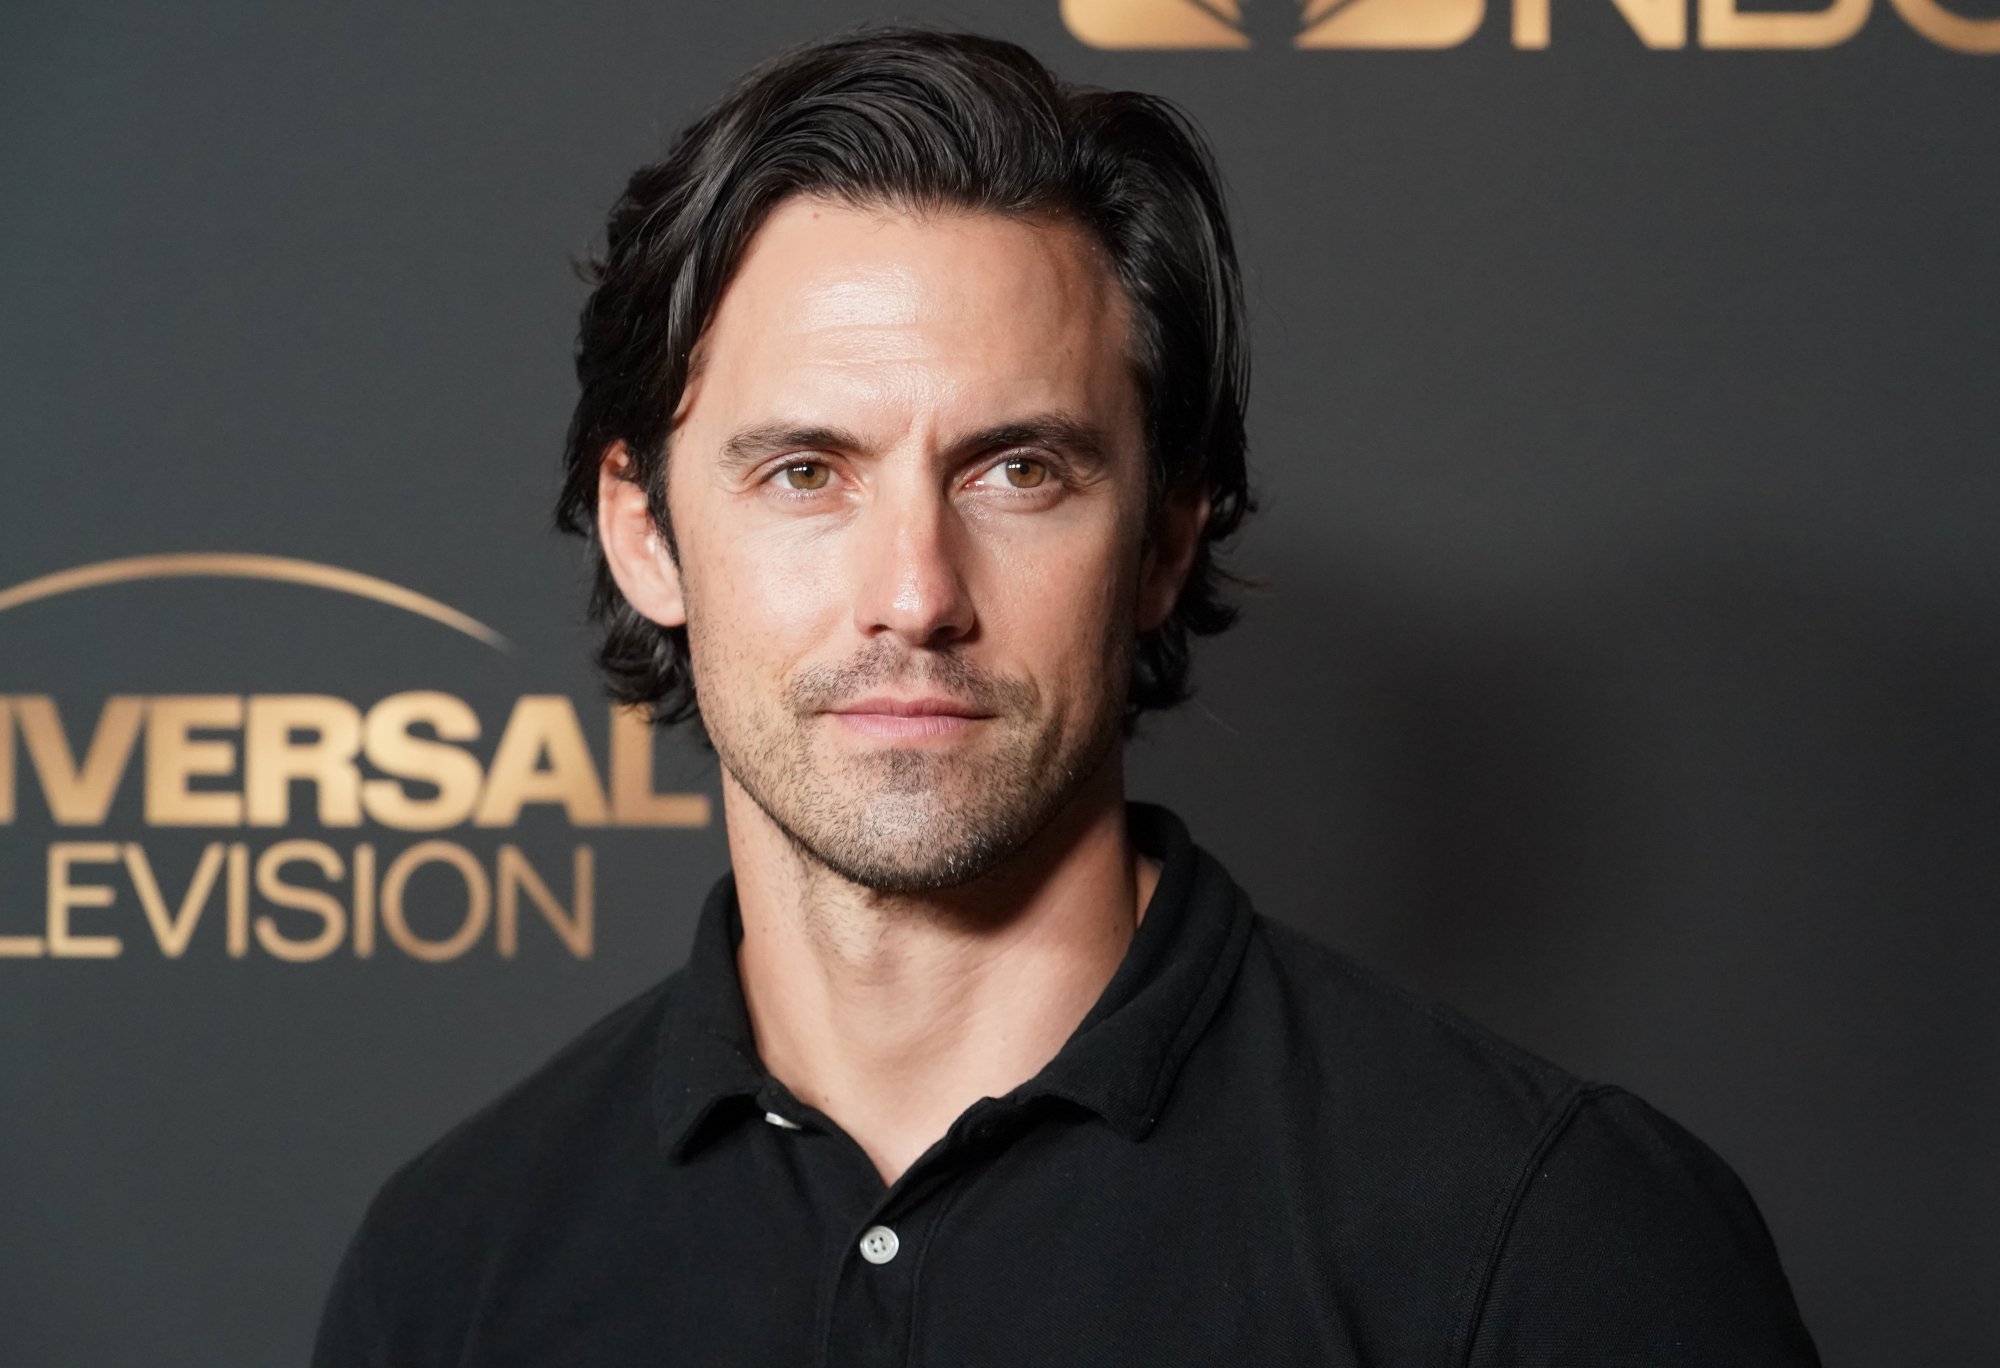 'Gilmore Girls' star Milo Ventimiglia, who plays Rory's love interest Jess. His dark hair is slicked back, and he's wearing a black shirt.